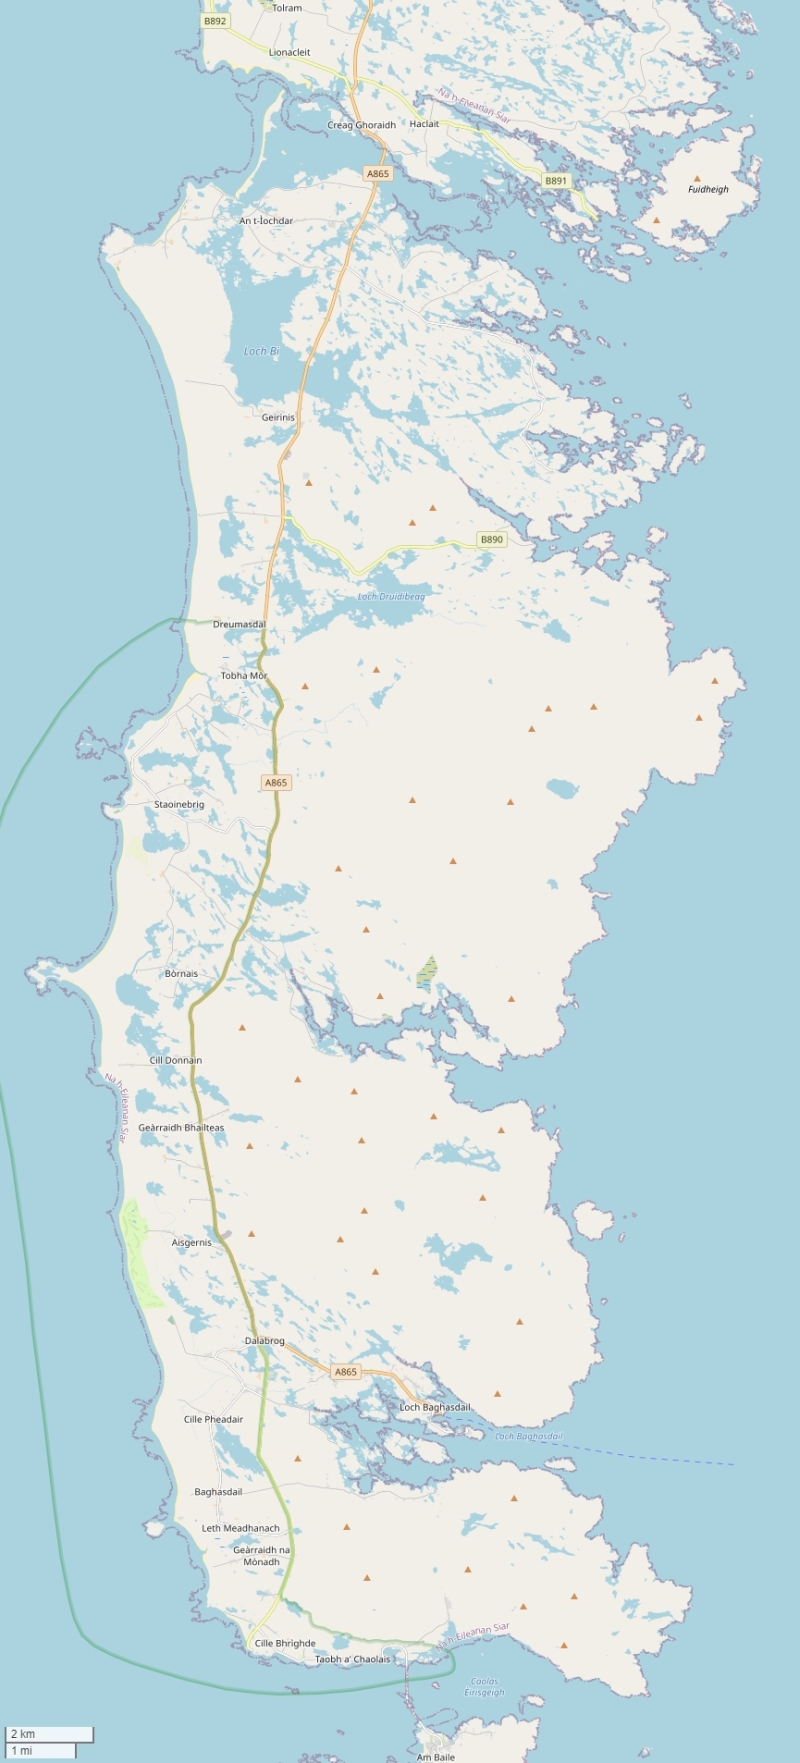 South Uist Map